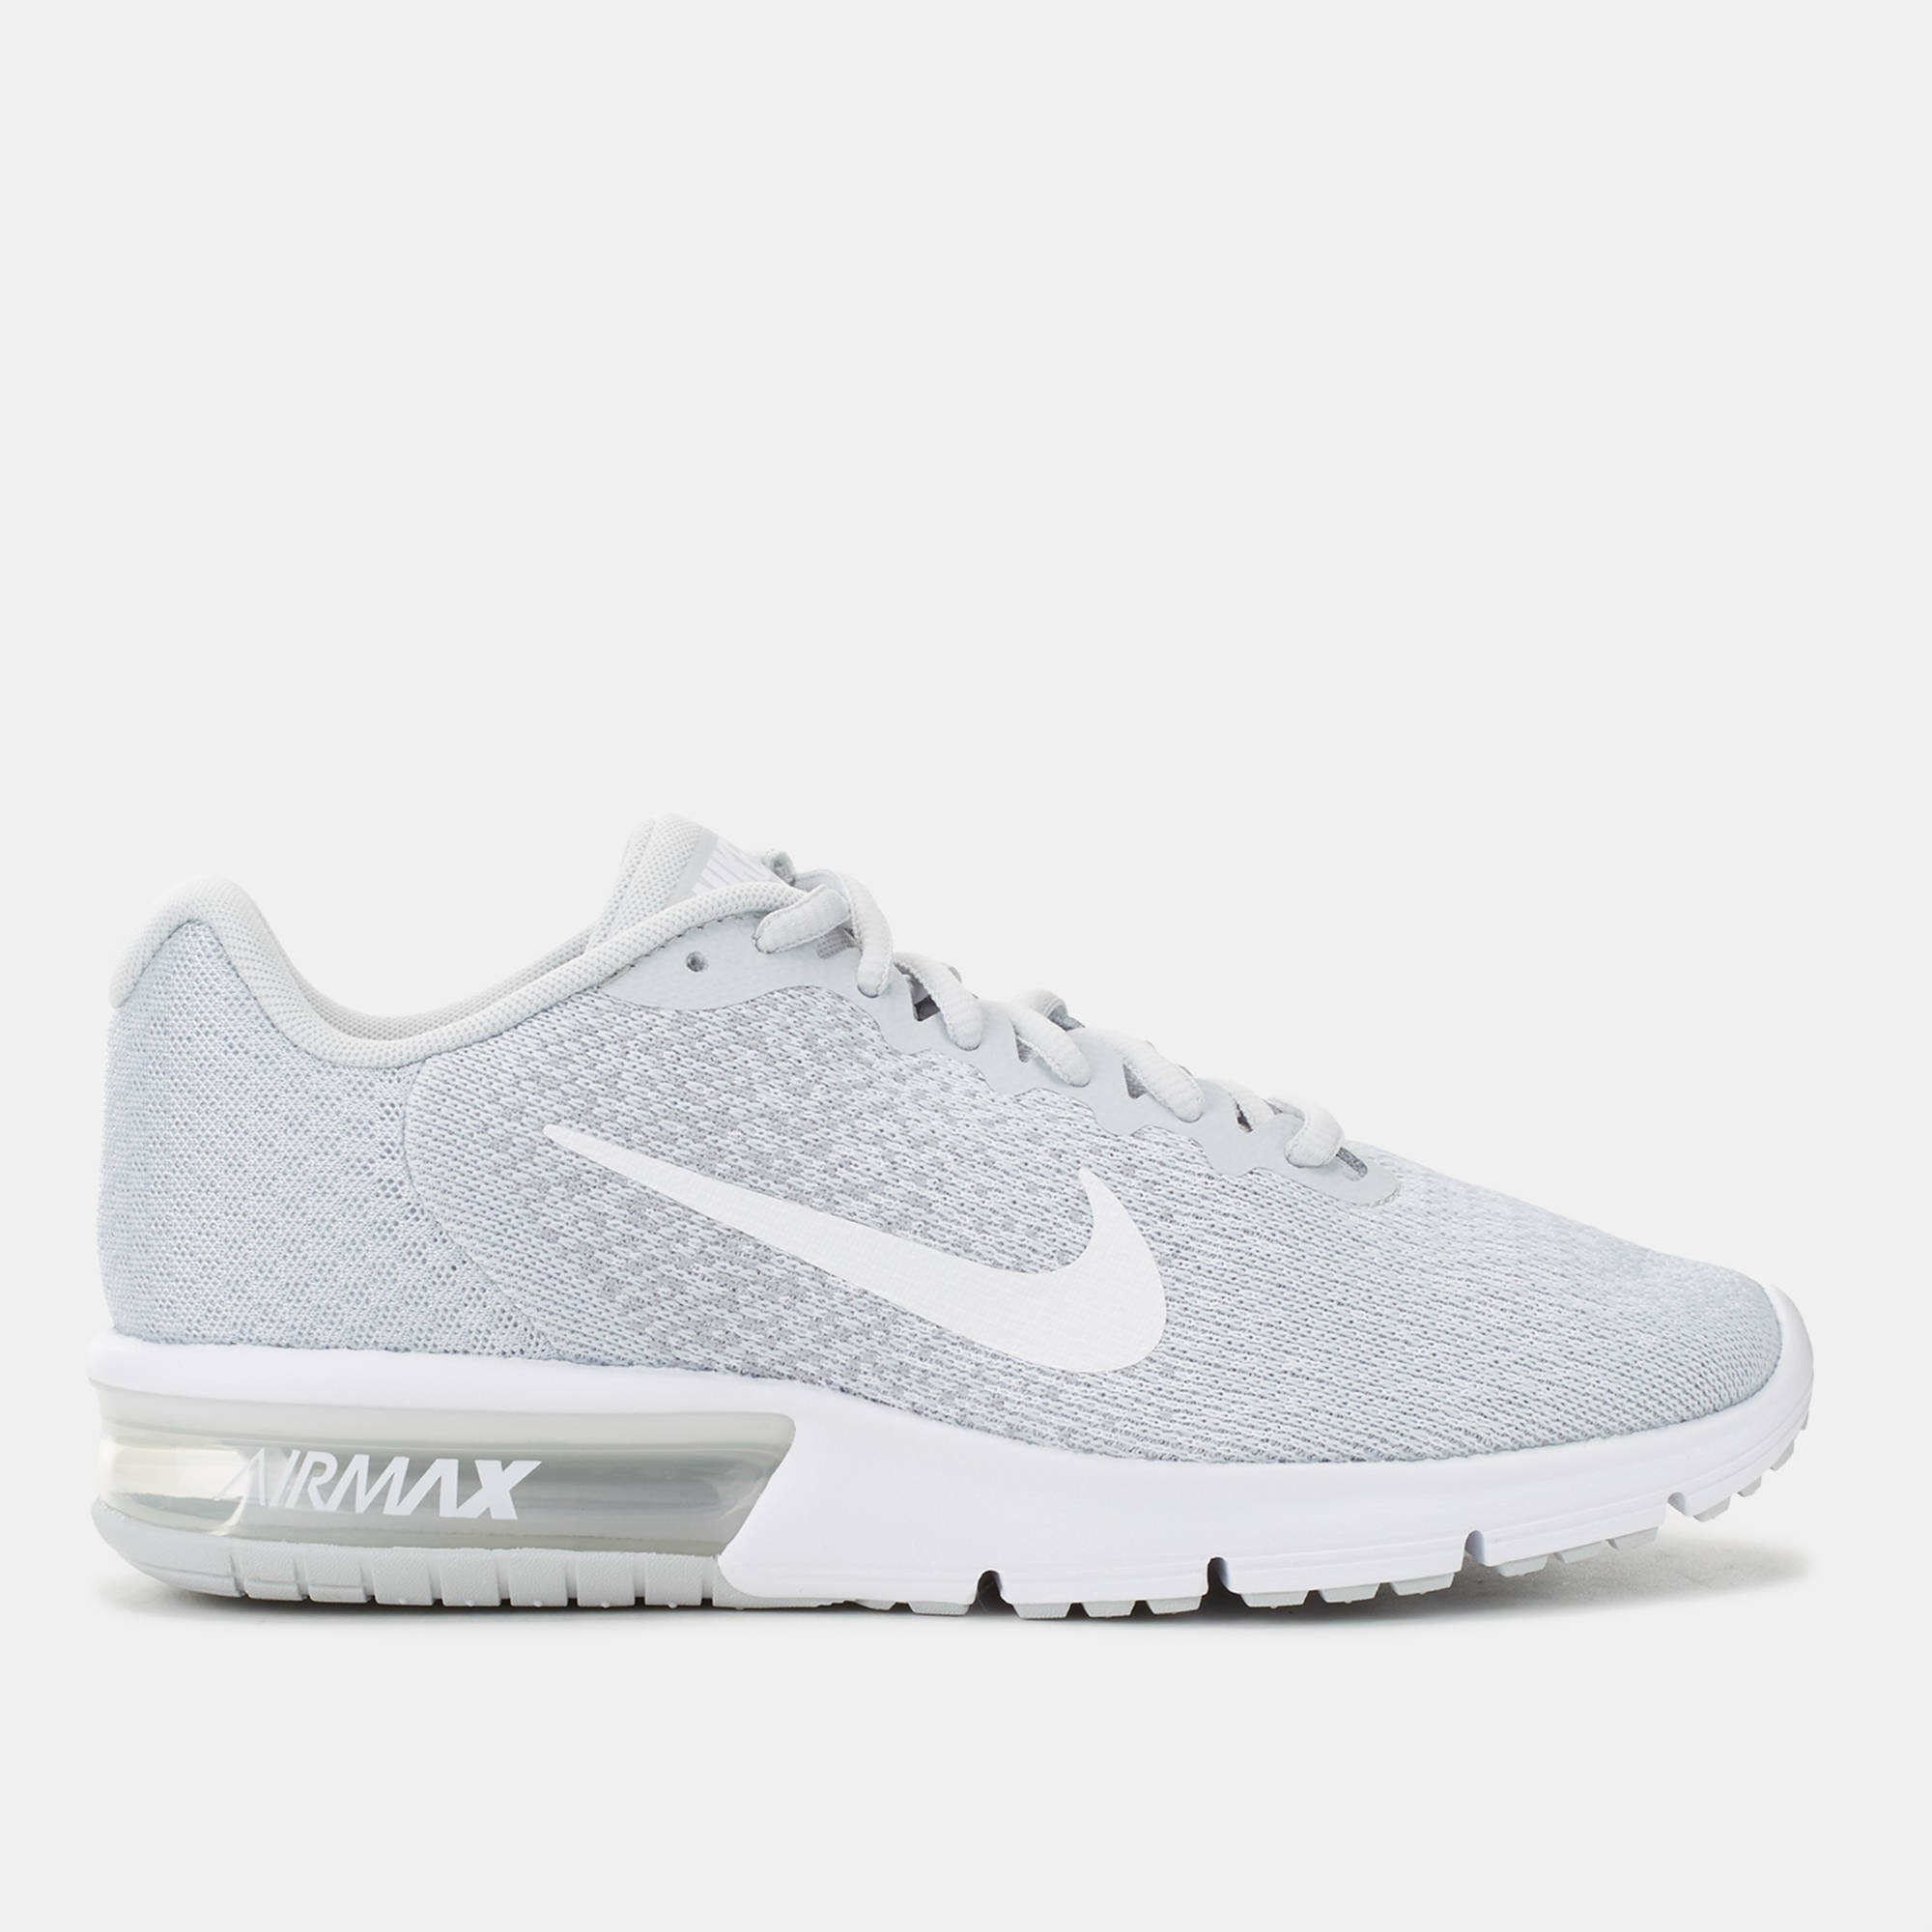 nike air max sequent 2 femme cheap buy online